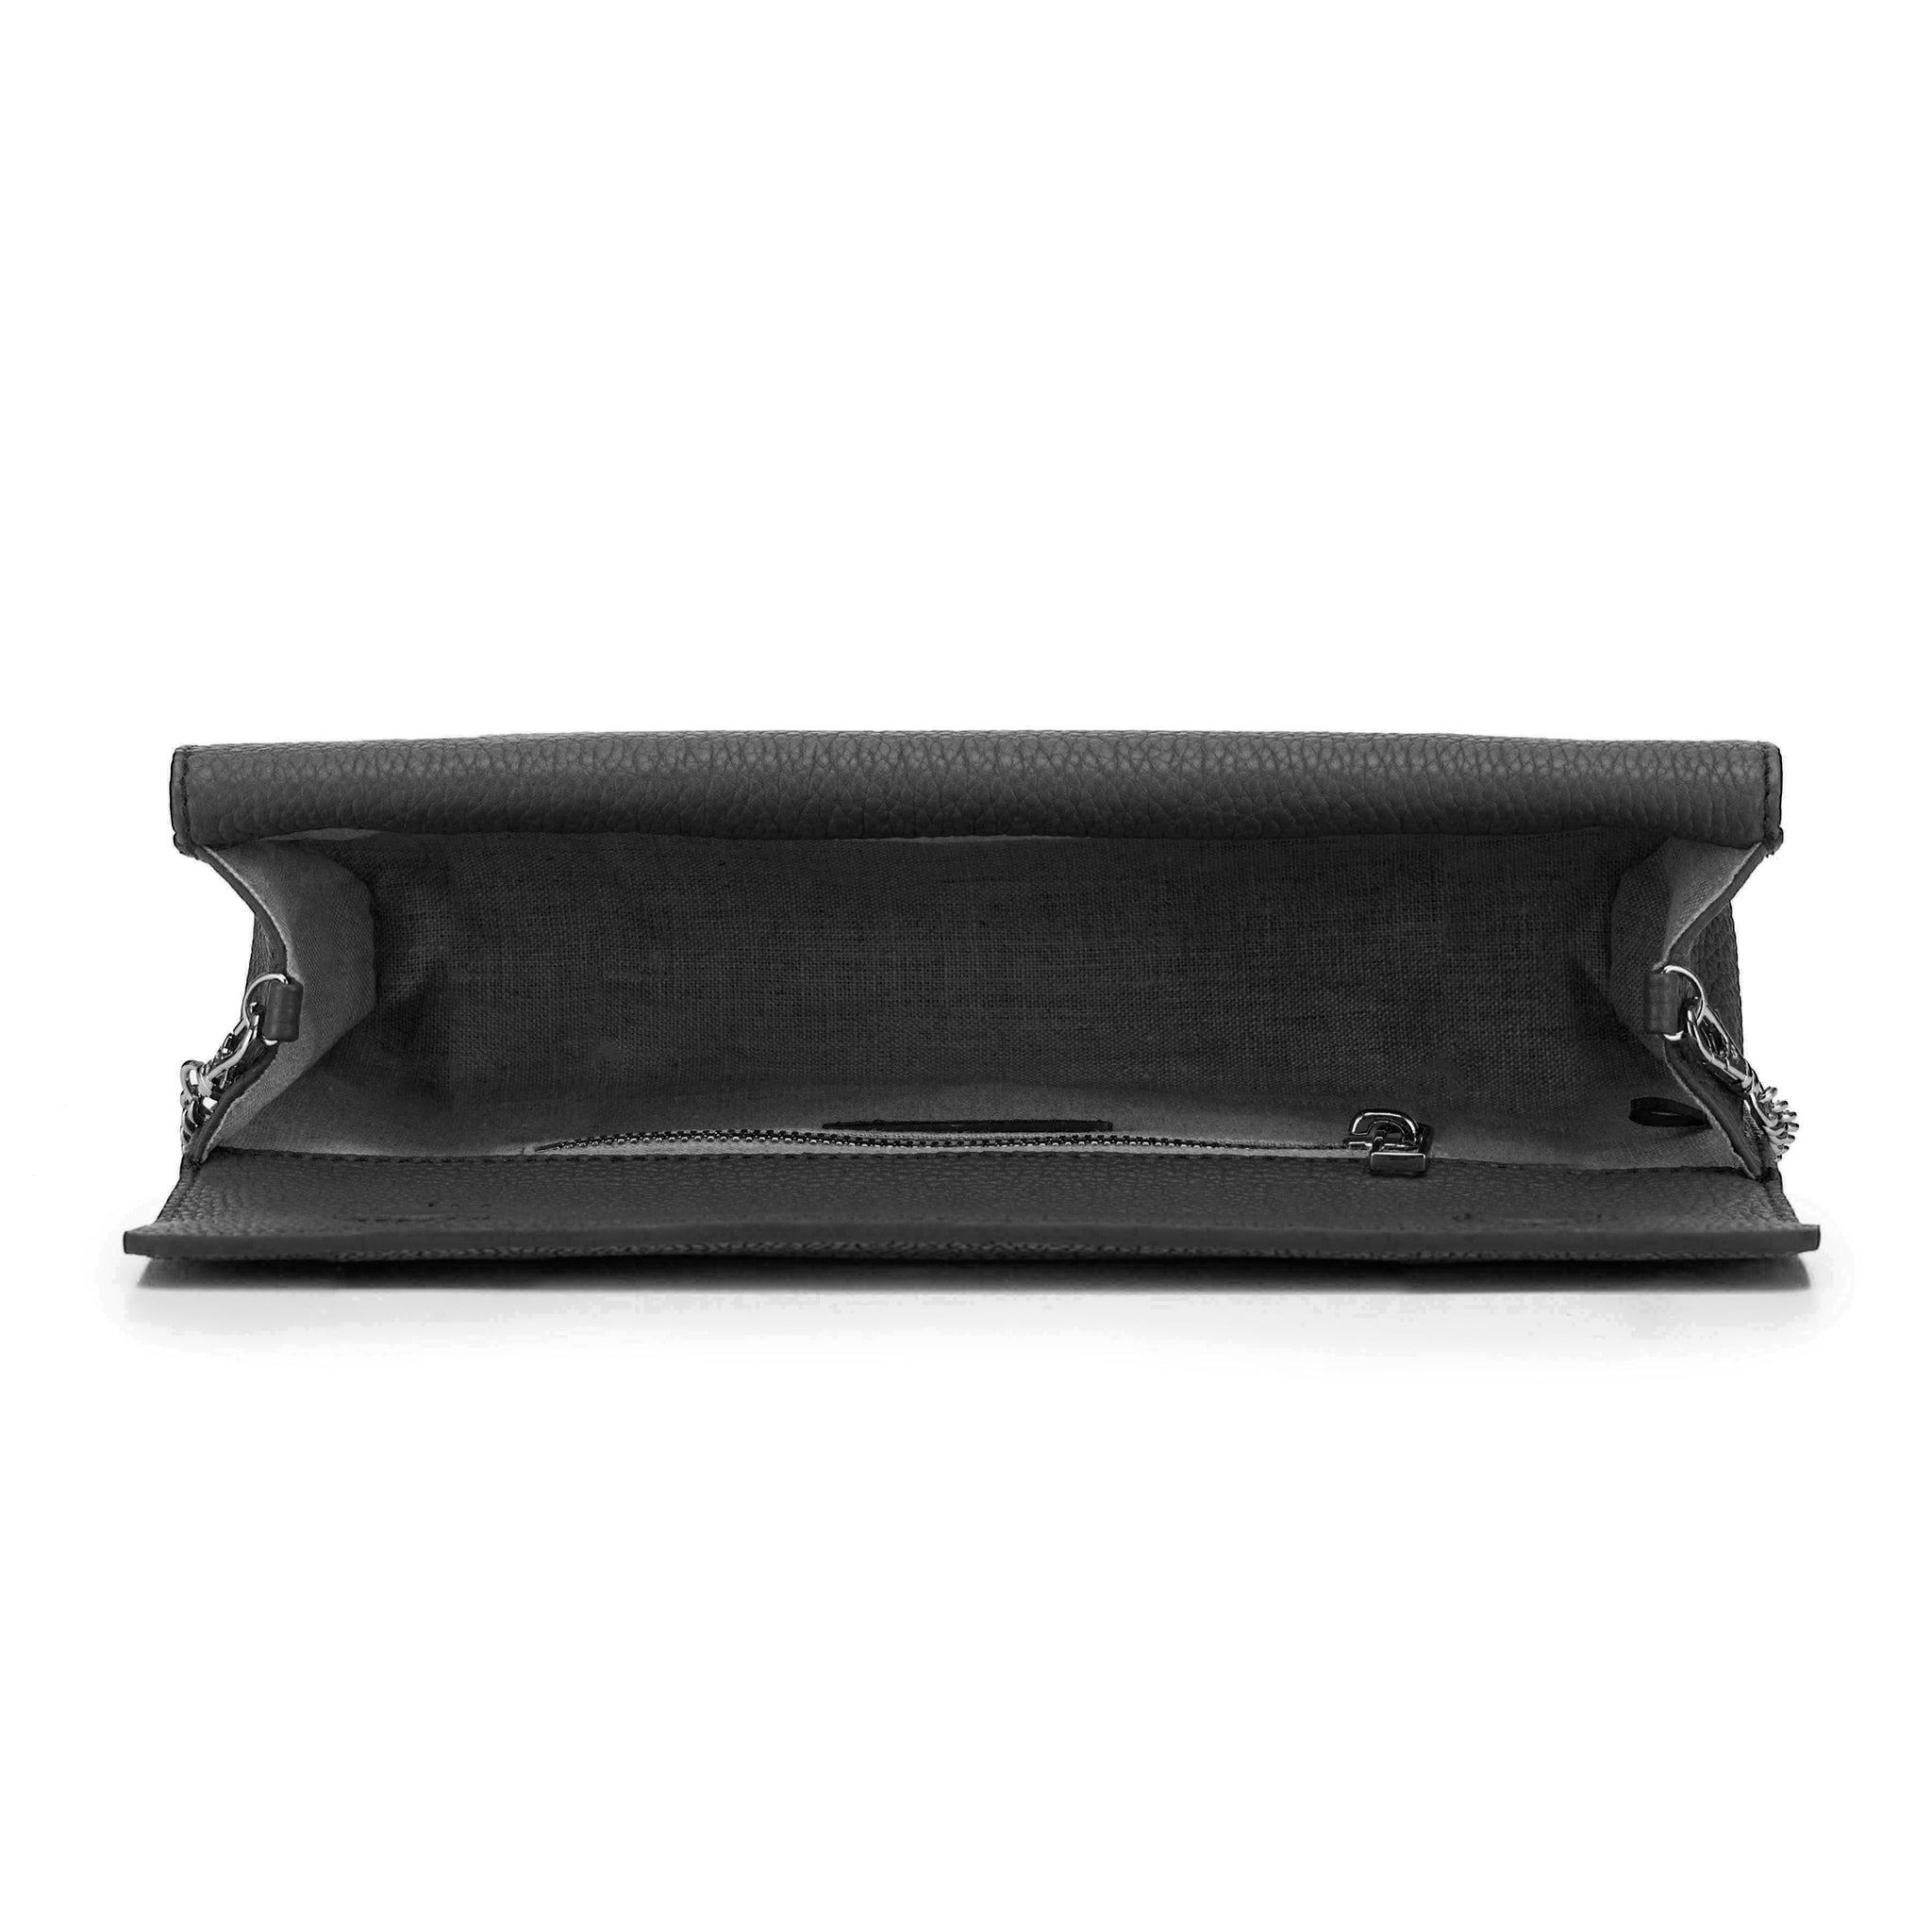 Black Shagreen Black Leather Body Detachable Chain Holly Oversize Clutch Inside View - Vivo Direct